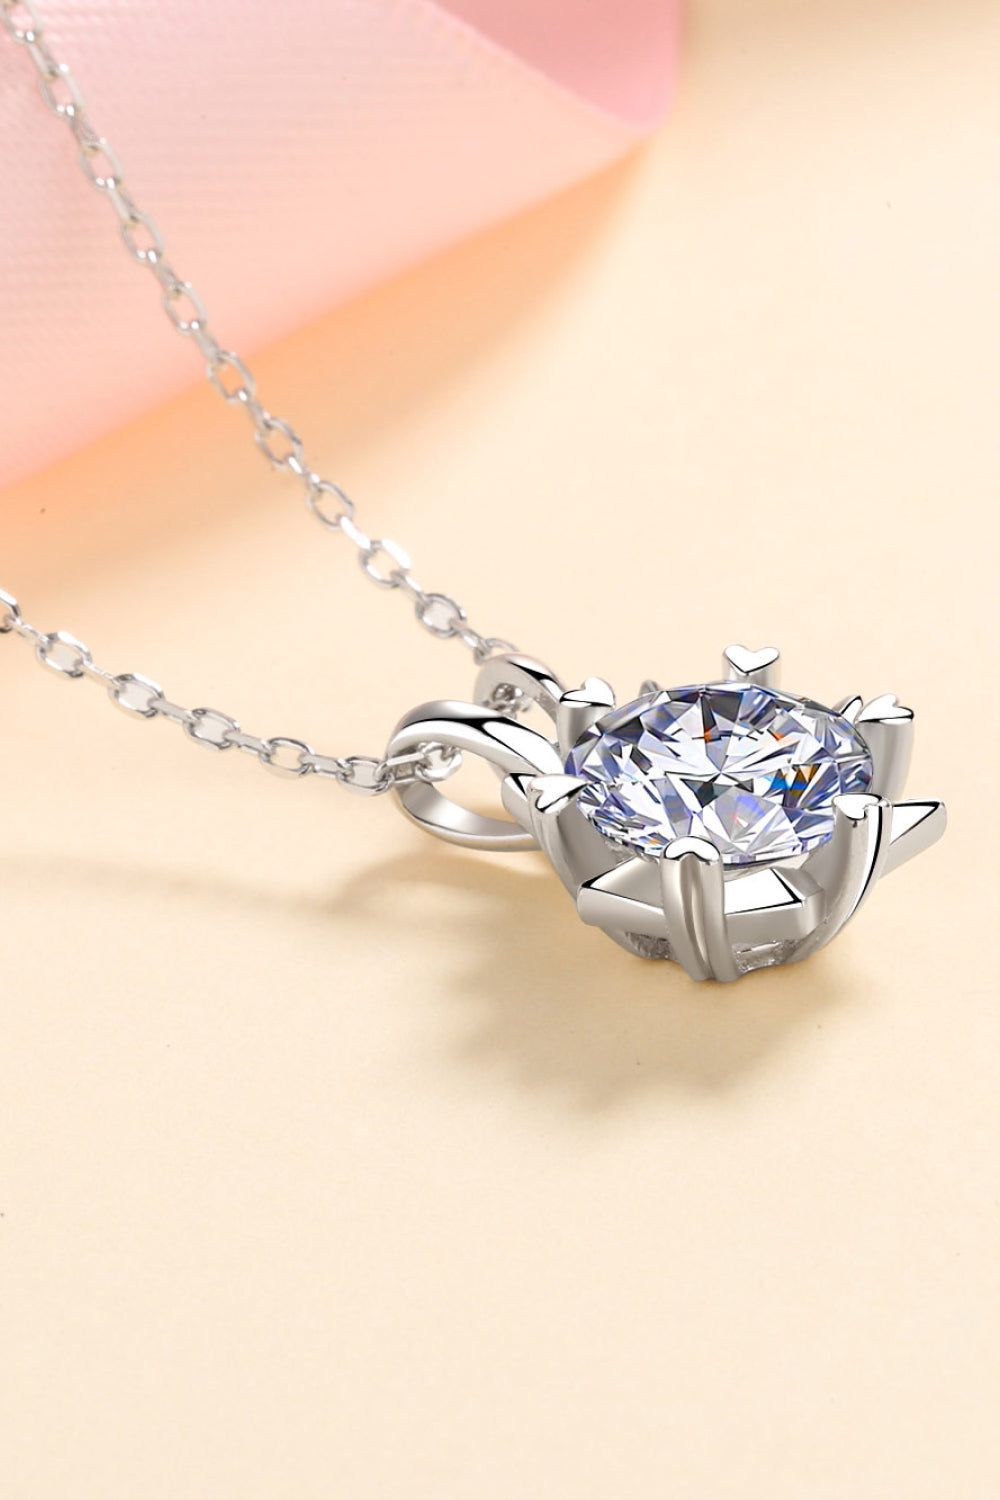 Women’s Learning To Love 925 Sterling Silver Moissanite Pendant Necklace